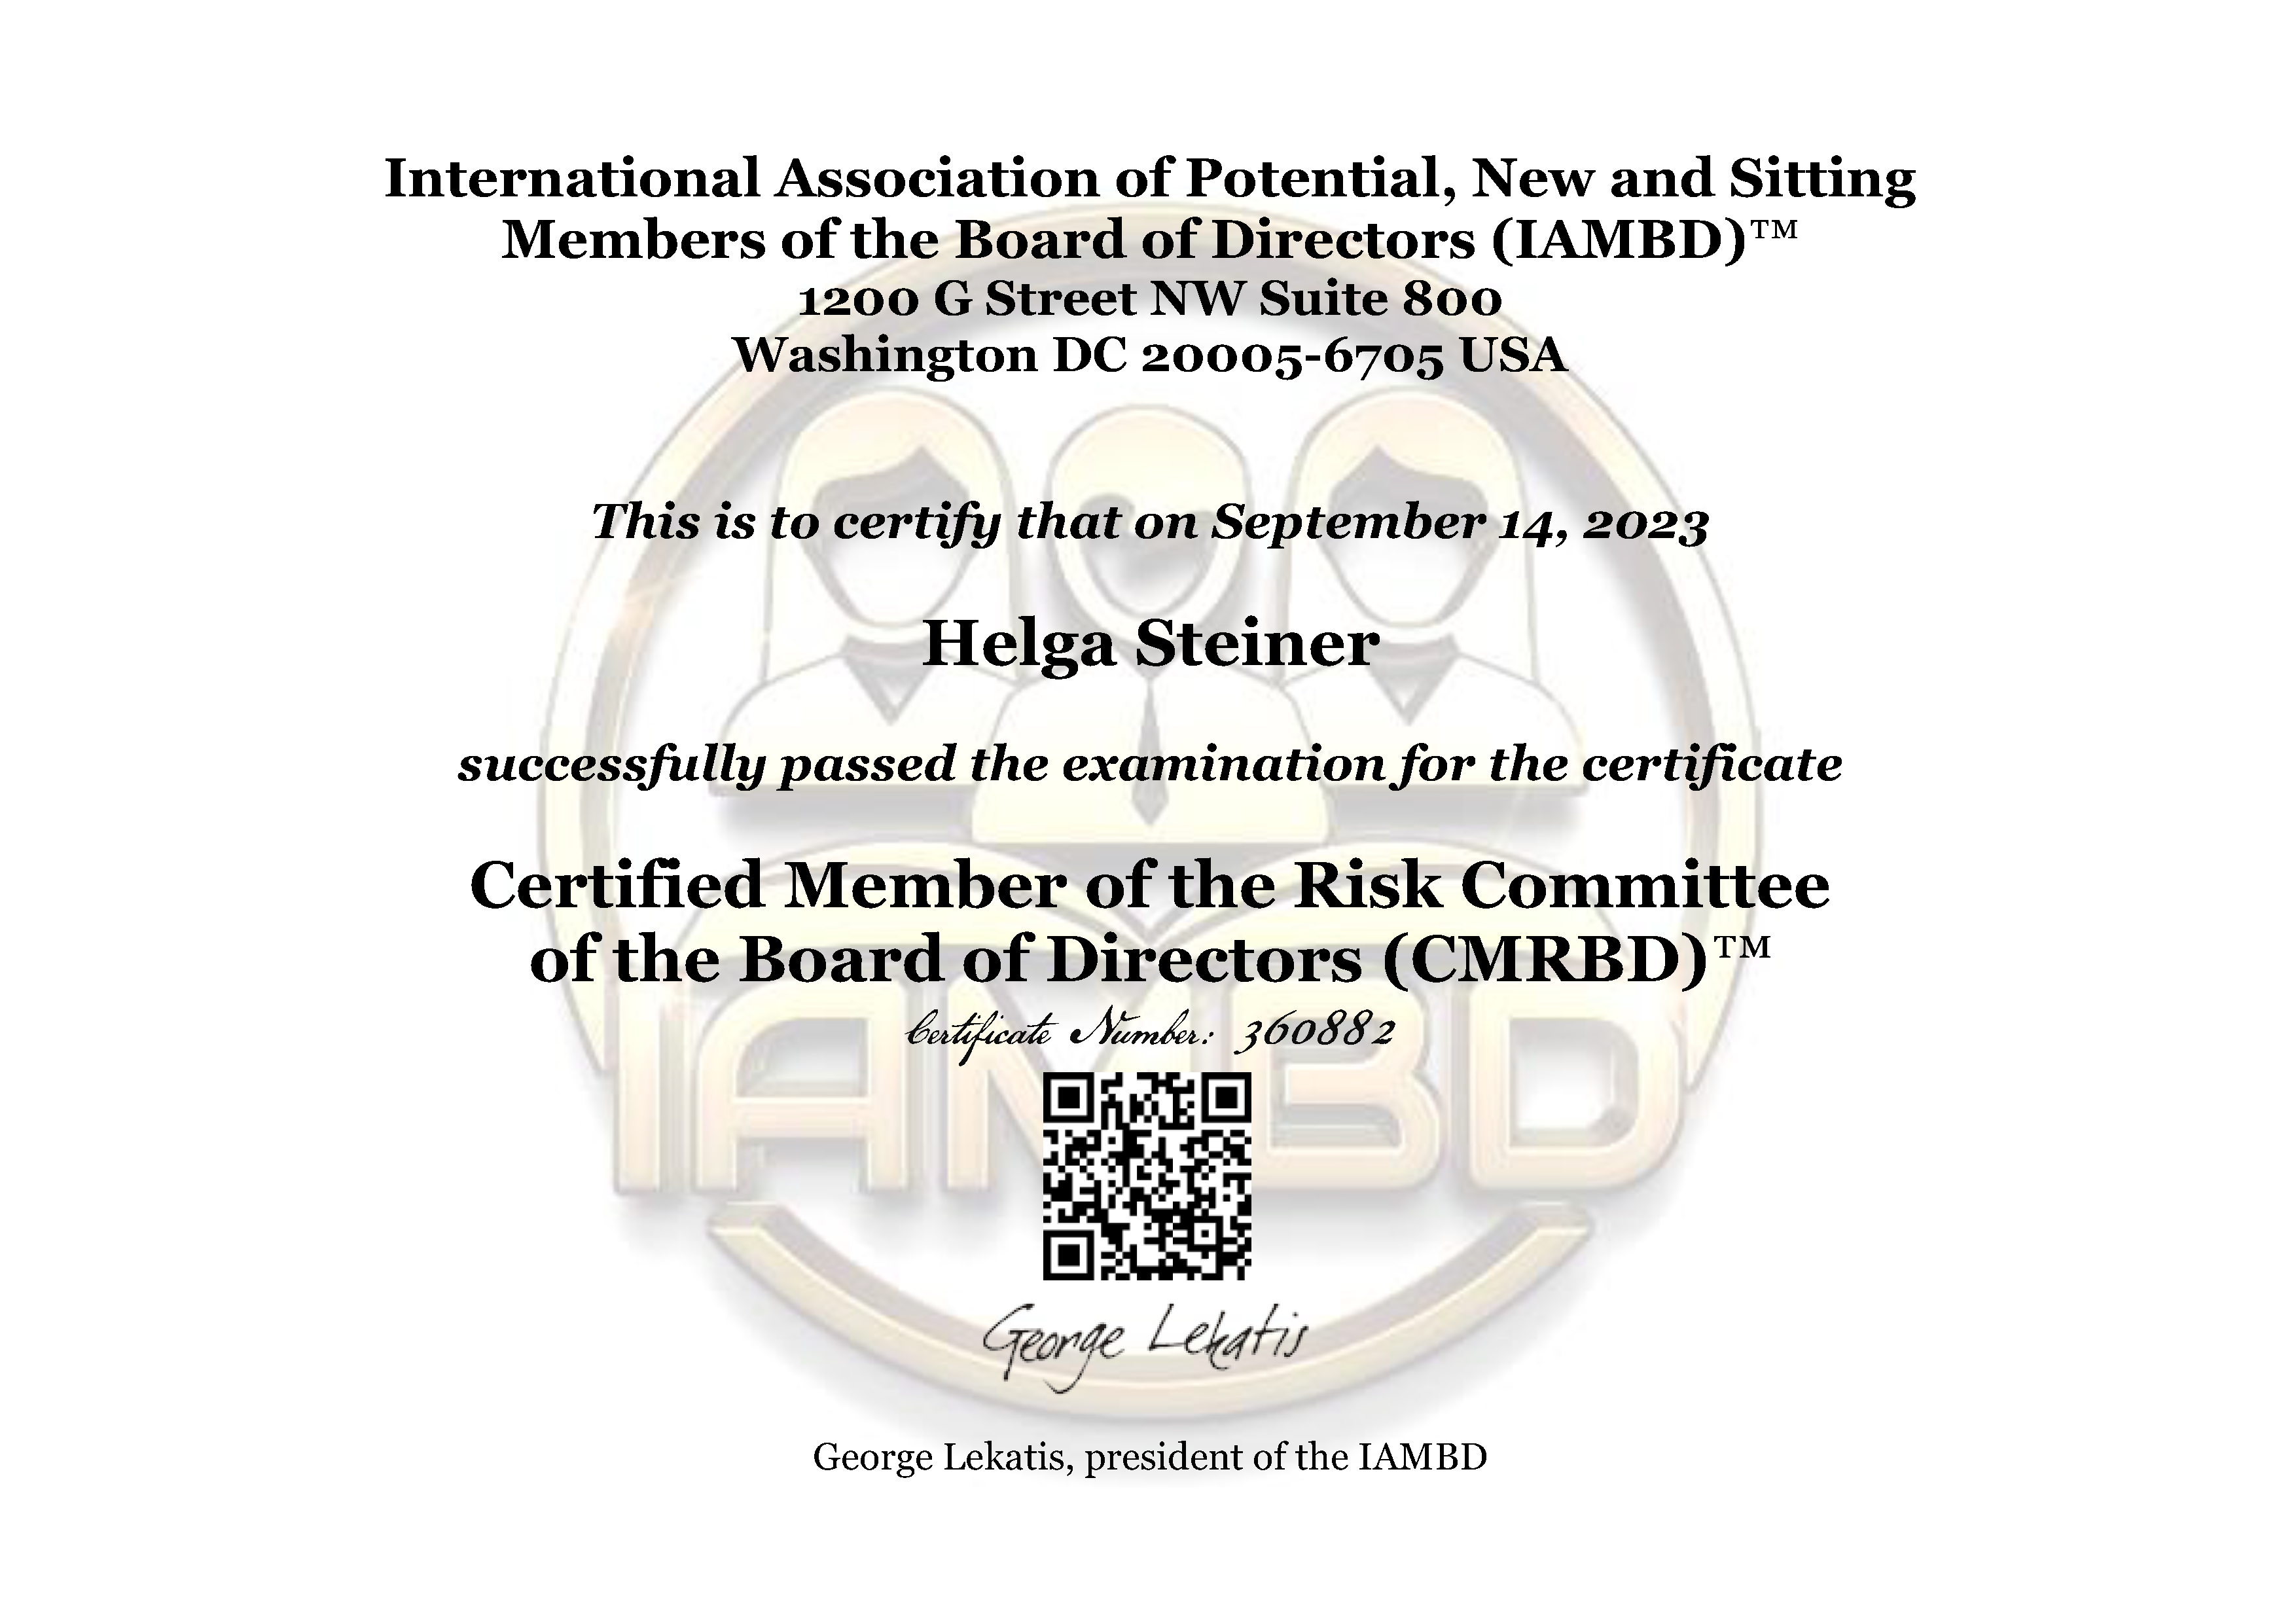 Certified Member of the Risk Committee of the Board of Directors (CMRBD)